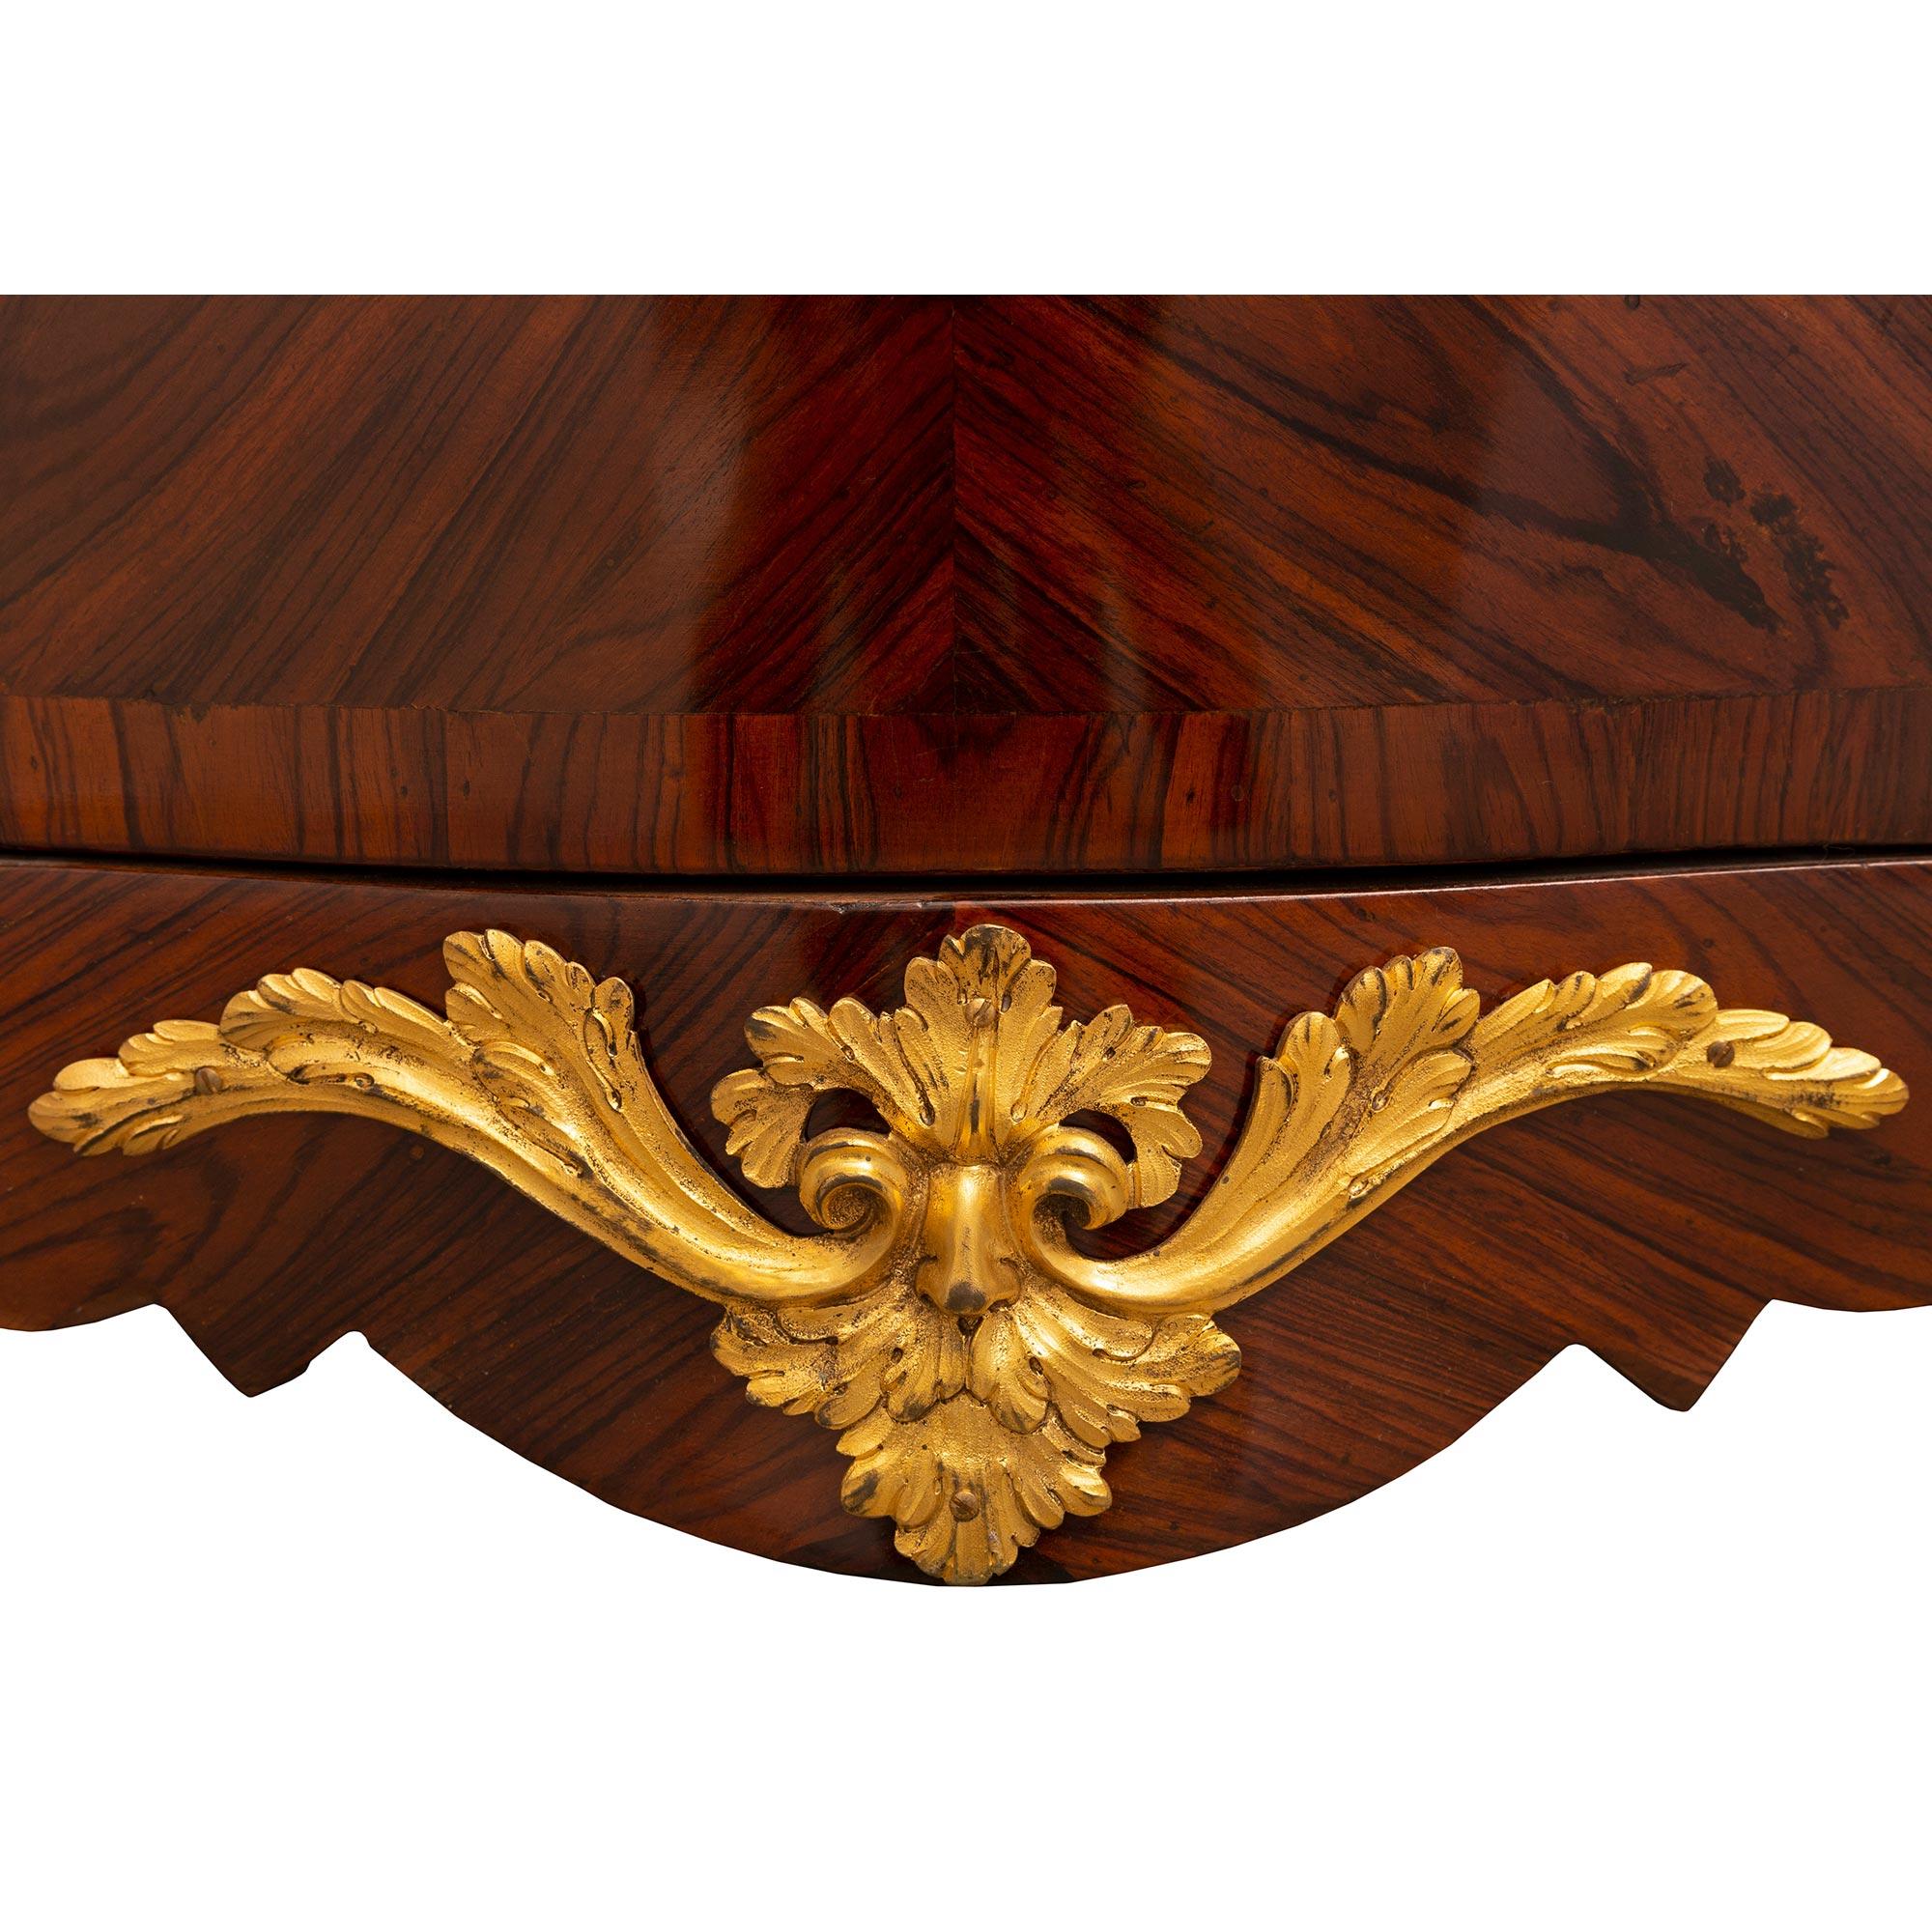 French 19th Century Louis XV St. Kingwood Inlaid Secretary For Sale 6